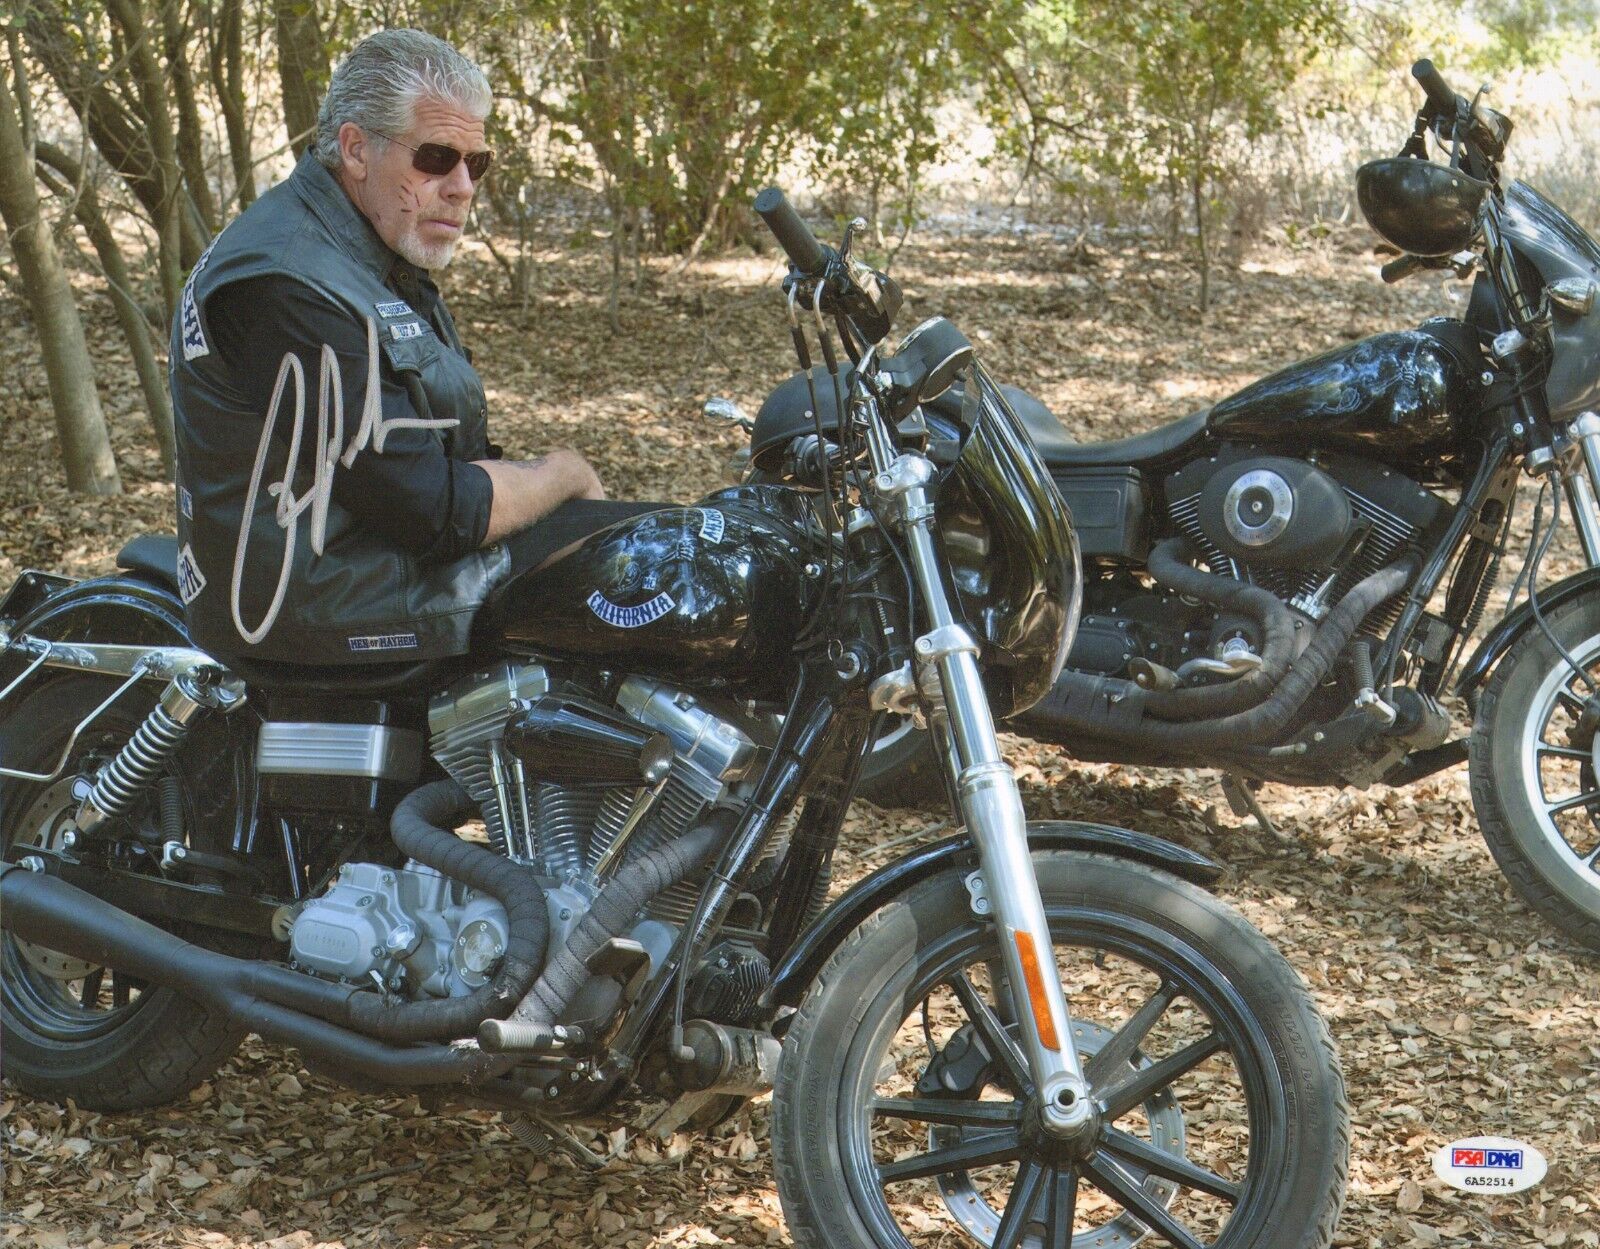 Ron Perlman Signed 11x14 Photo Poster painting PSA/DNA COA Picture Autograph Sons of Anarchy SOA